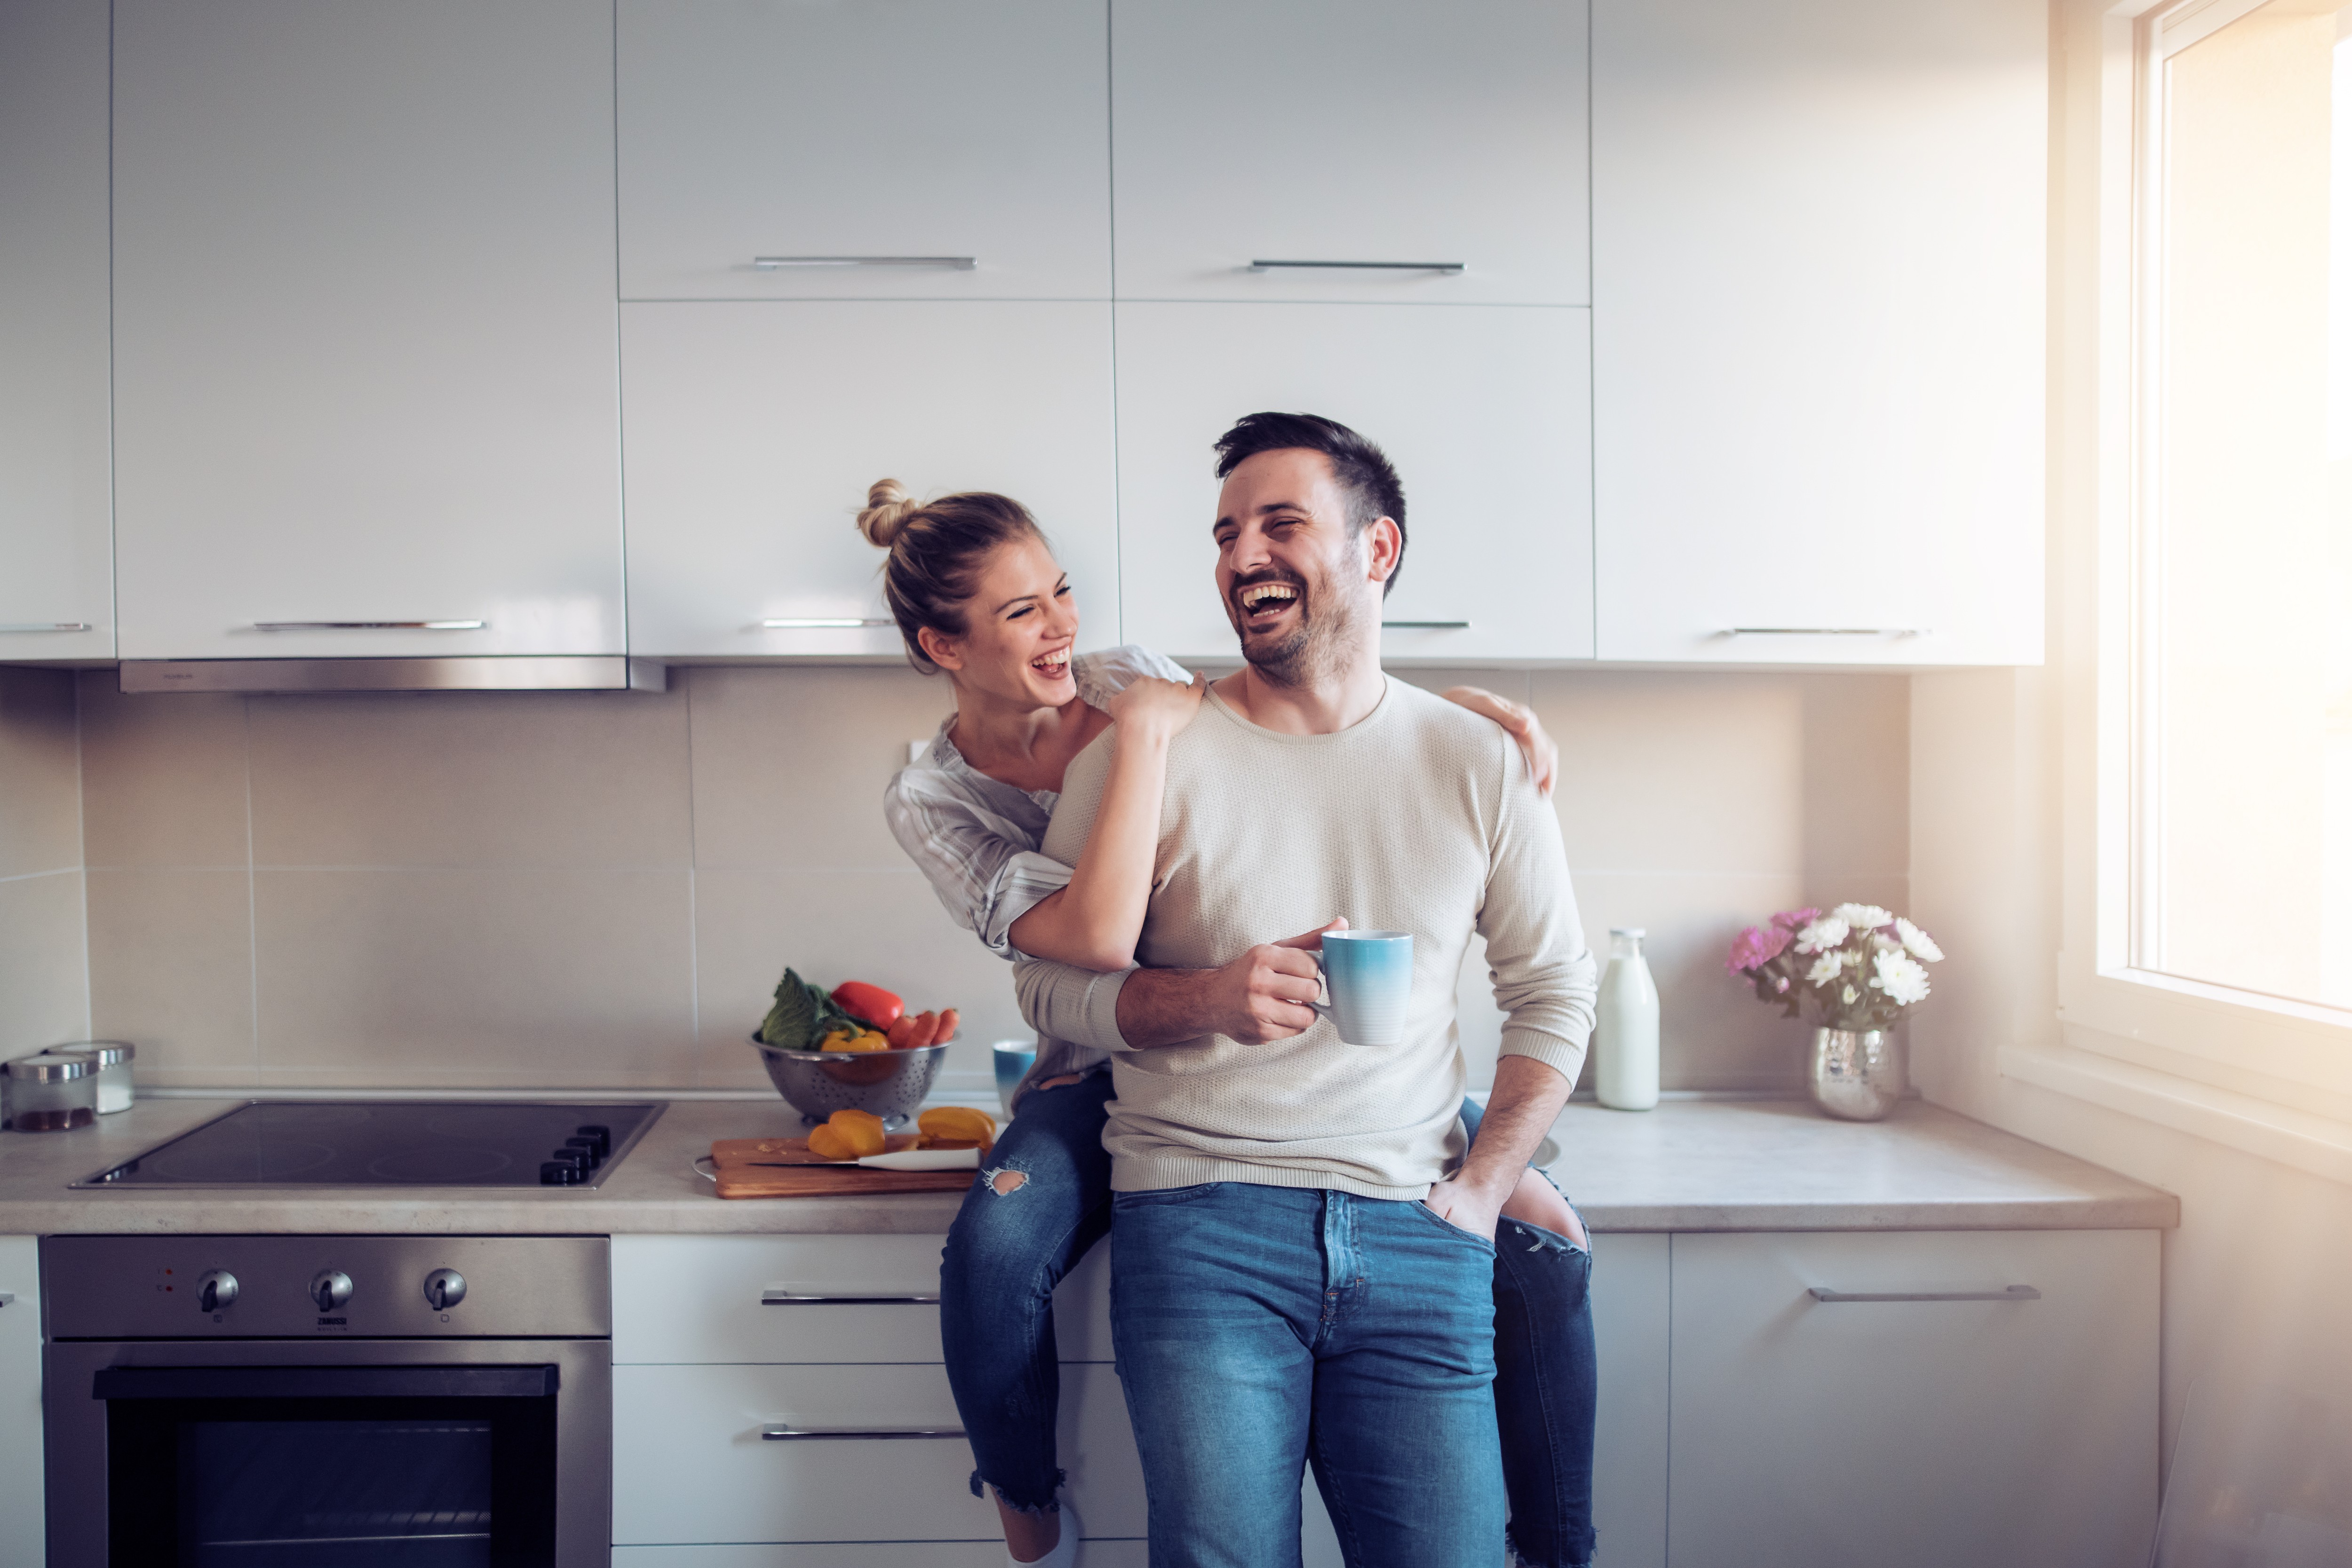 A couple laughing in the kitchen